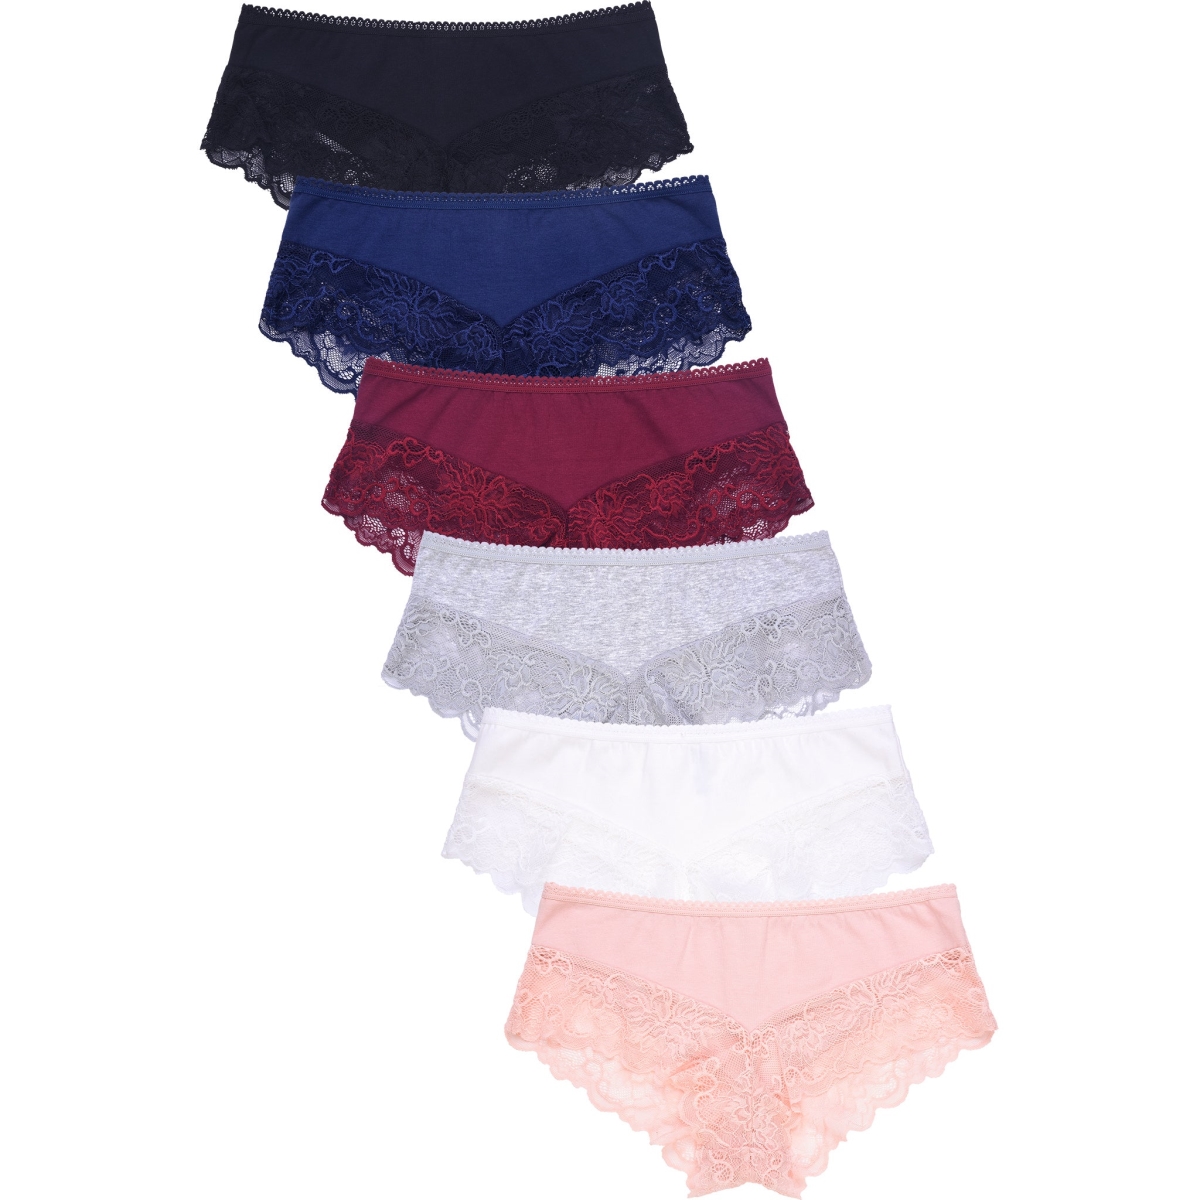 Picture of 247 Frenzy 247-LP1408CH2-LG Womens Essentials Cotton Stretch Hipster Panty Underwear - Assorted Color - Large - Pack of 6